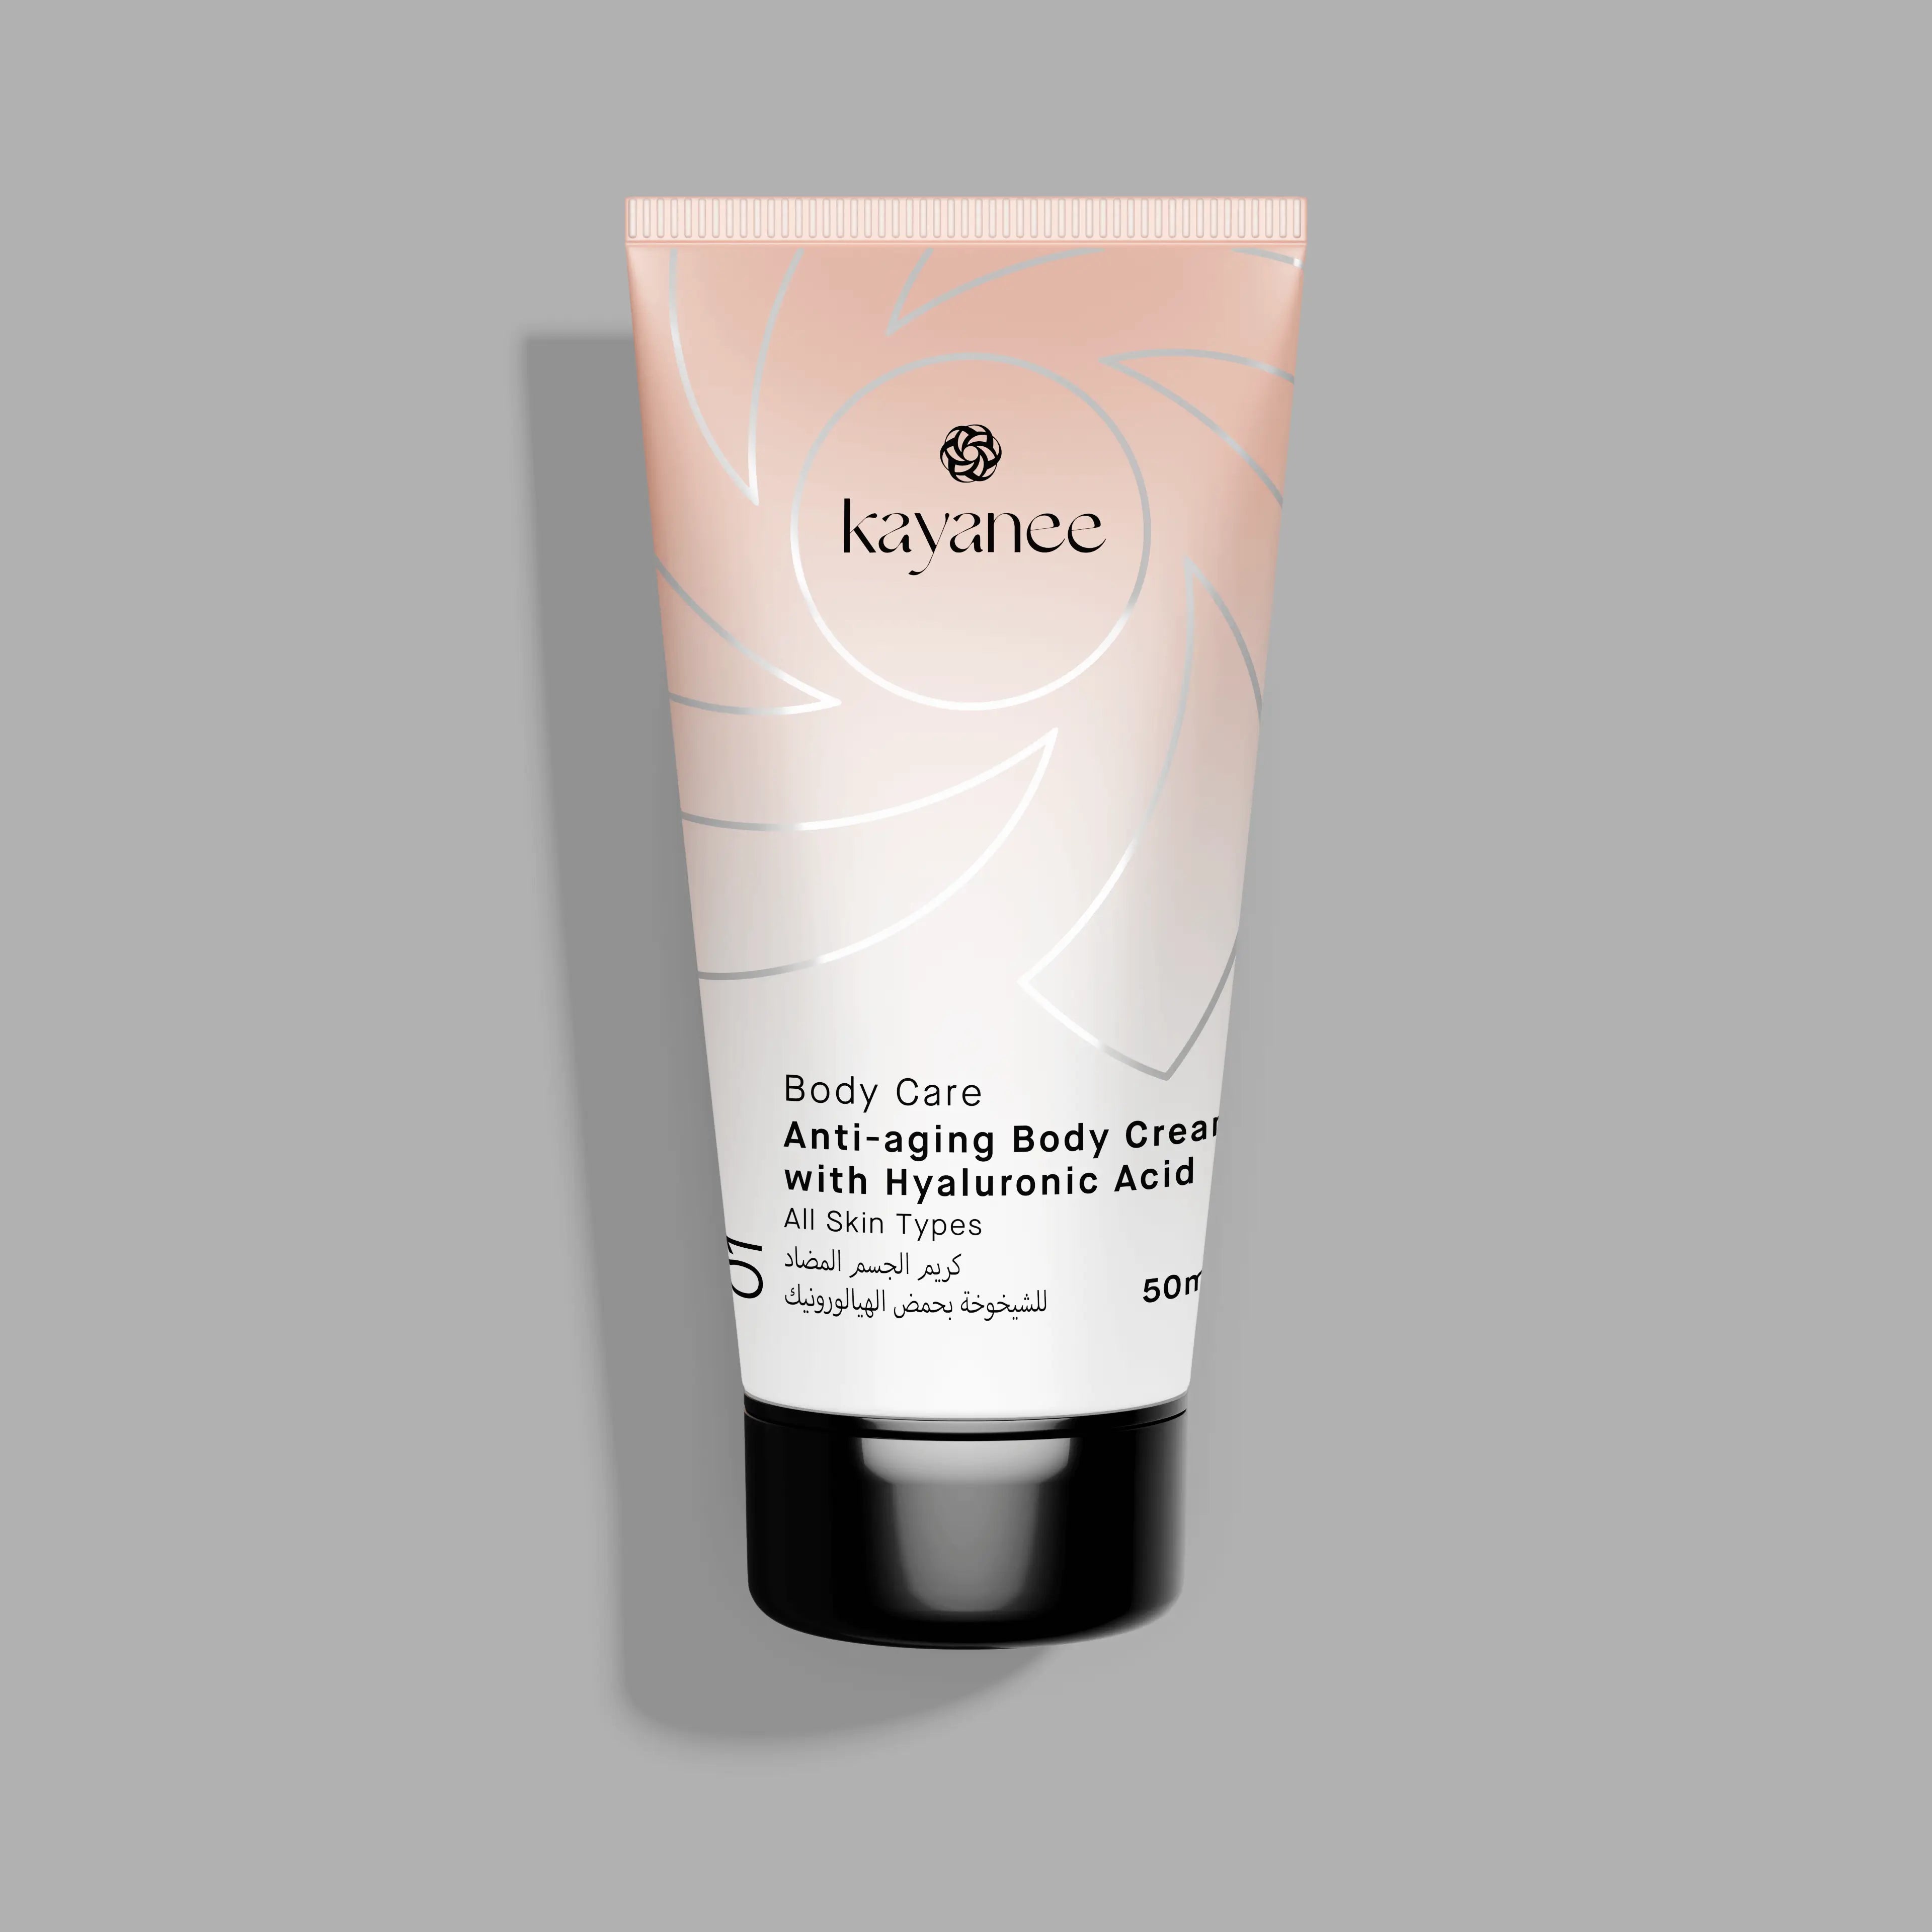 Anti-aging Body Cream with Hyaluronic Acid